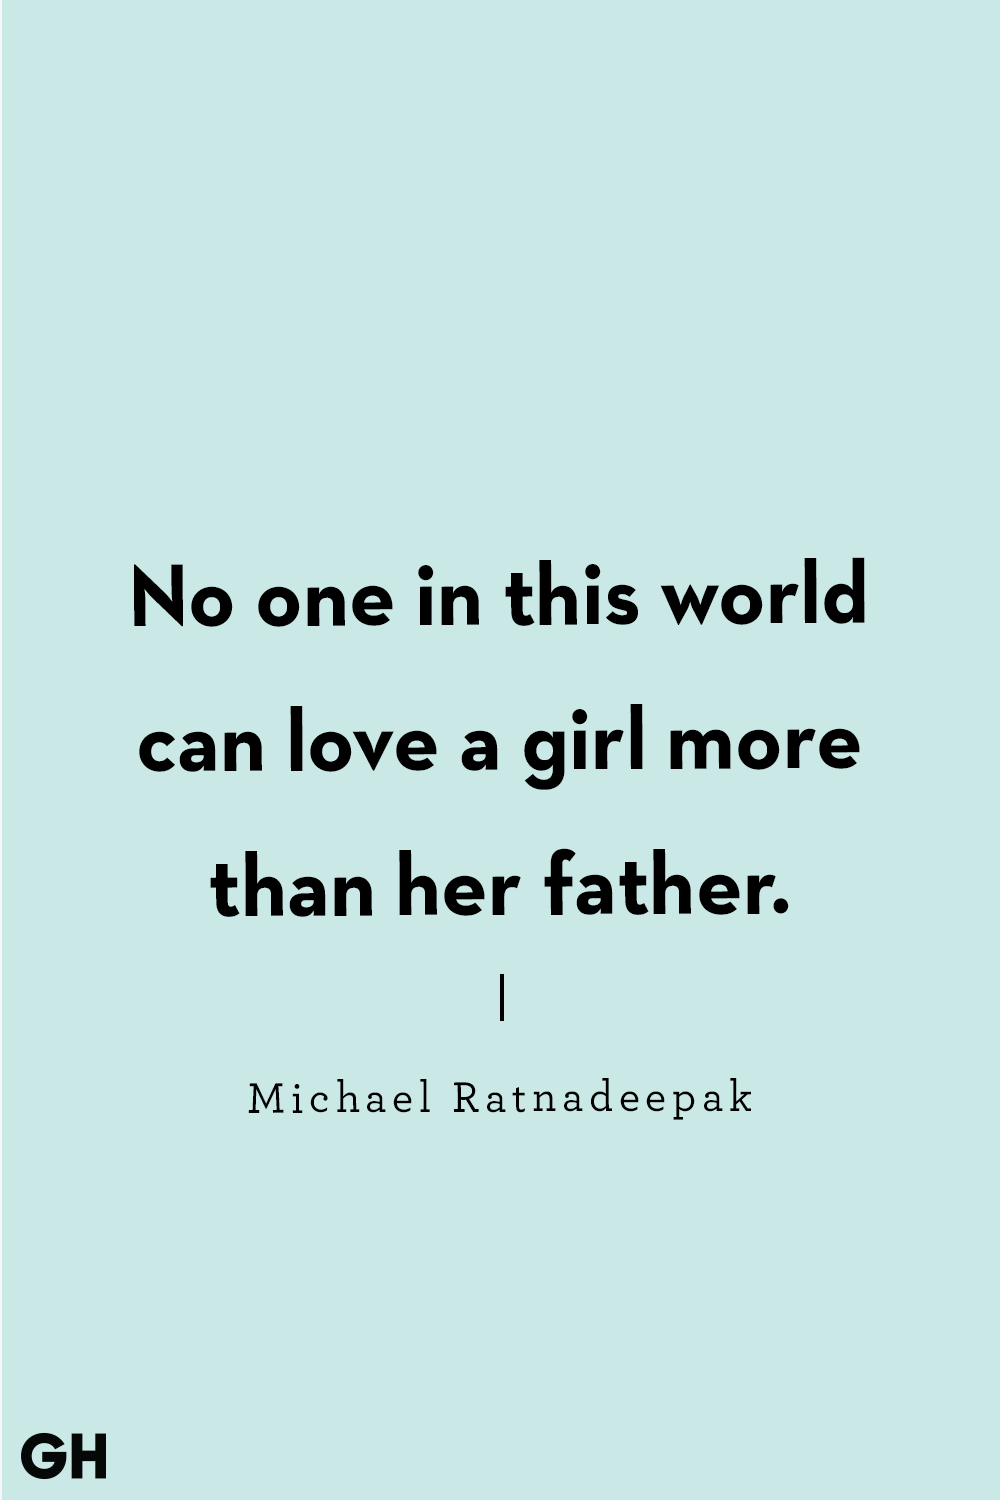 no one in this world can love a girl more than her father. michael ratnadeepak